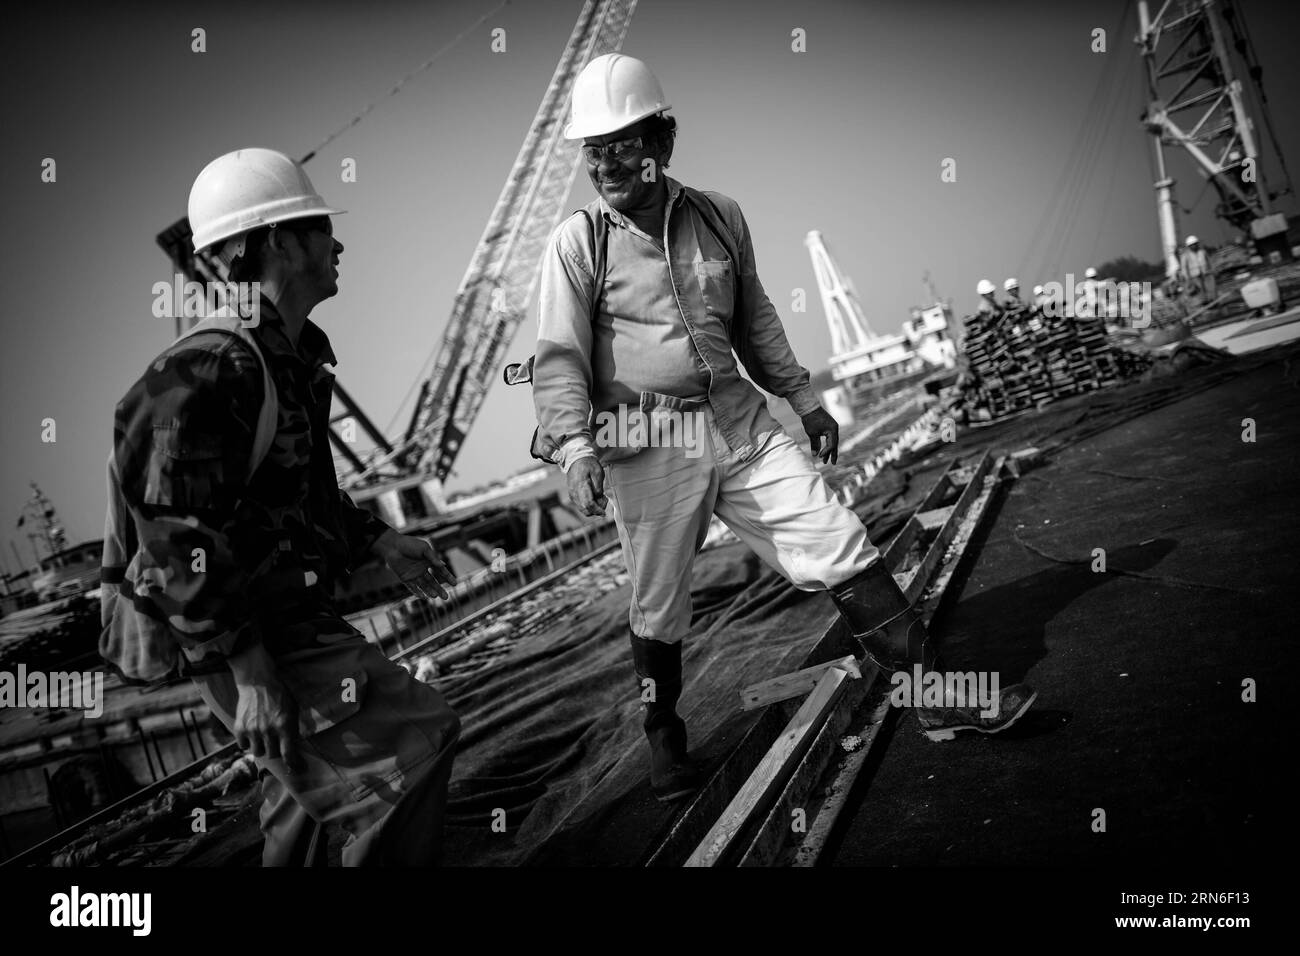 TUXPAN, July 22, 2015 -- Image taken on July 22, 2015 shows employees from China (L) and Mexico (R) working at the construction site of the Tuxpan Port Terminal in Tuxpan city, Veracruz state, Mexico. Around 90 employees from China and 100 from Mexico have been working for a year in the construction site of the port terminal for containers, vehicles and agricultural material. This is the second construction project made by Chinese company with labor from Chinese and Mexican origins.Pedro Mera) (fnc) MEXICO-TUXPAN-CHINA-INDUSTRY-PORT-FEATURE e PedroxMera PUBLICATIONxNOTxINxCHN   Tuxpan July 22 Stock Photo